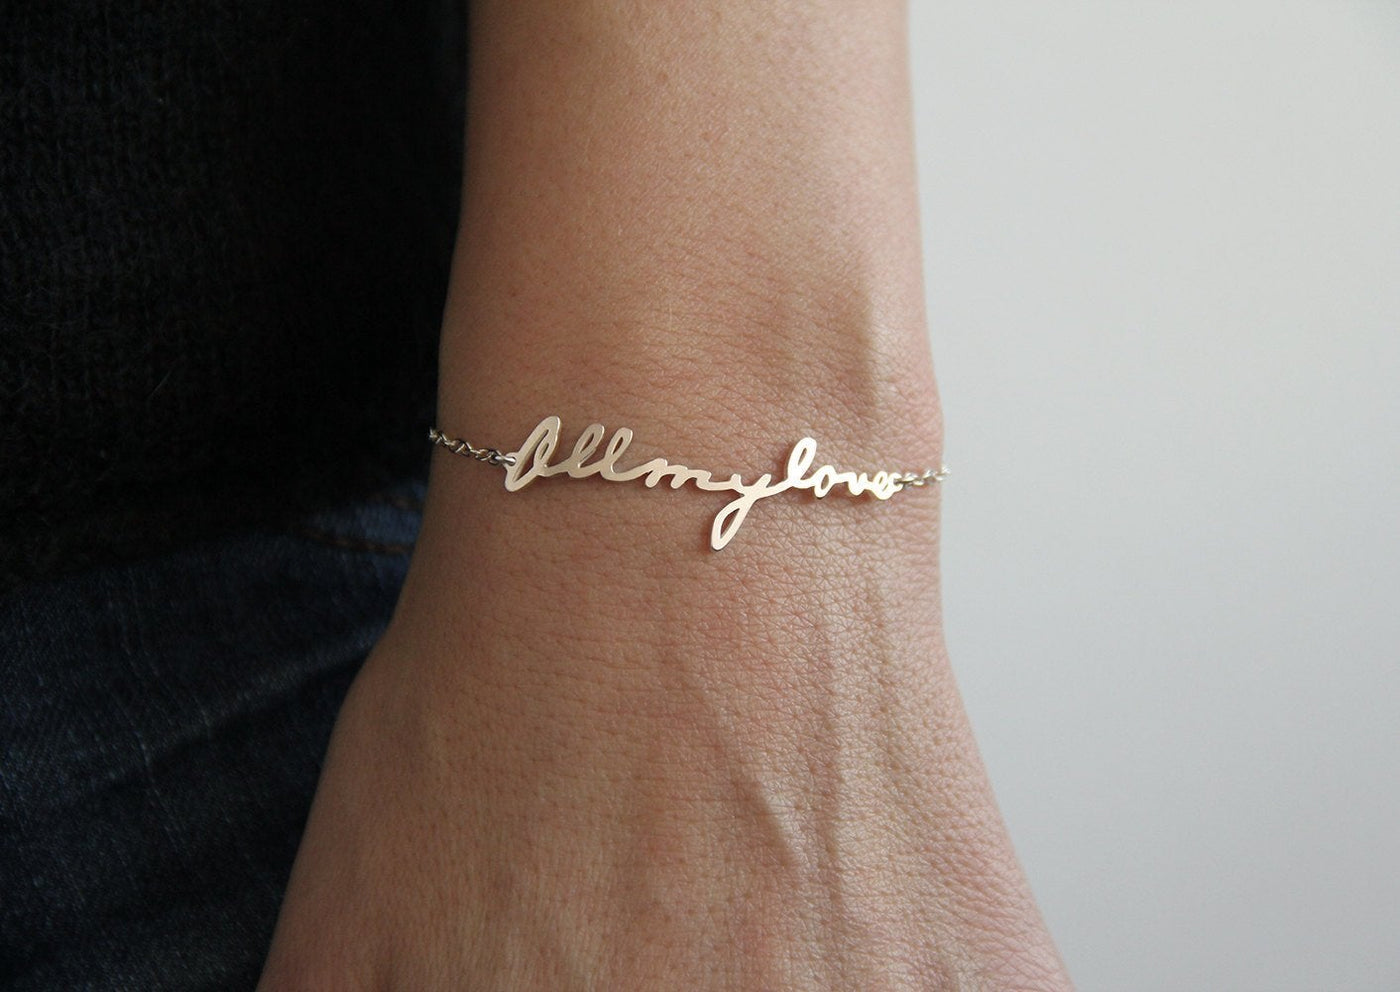 Gold chain bracelet with personalized signature